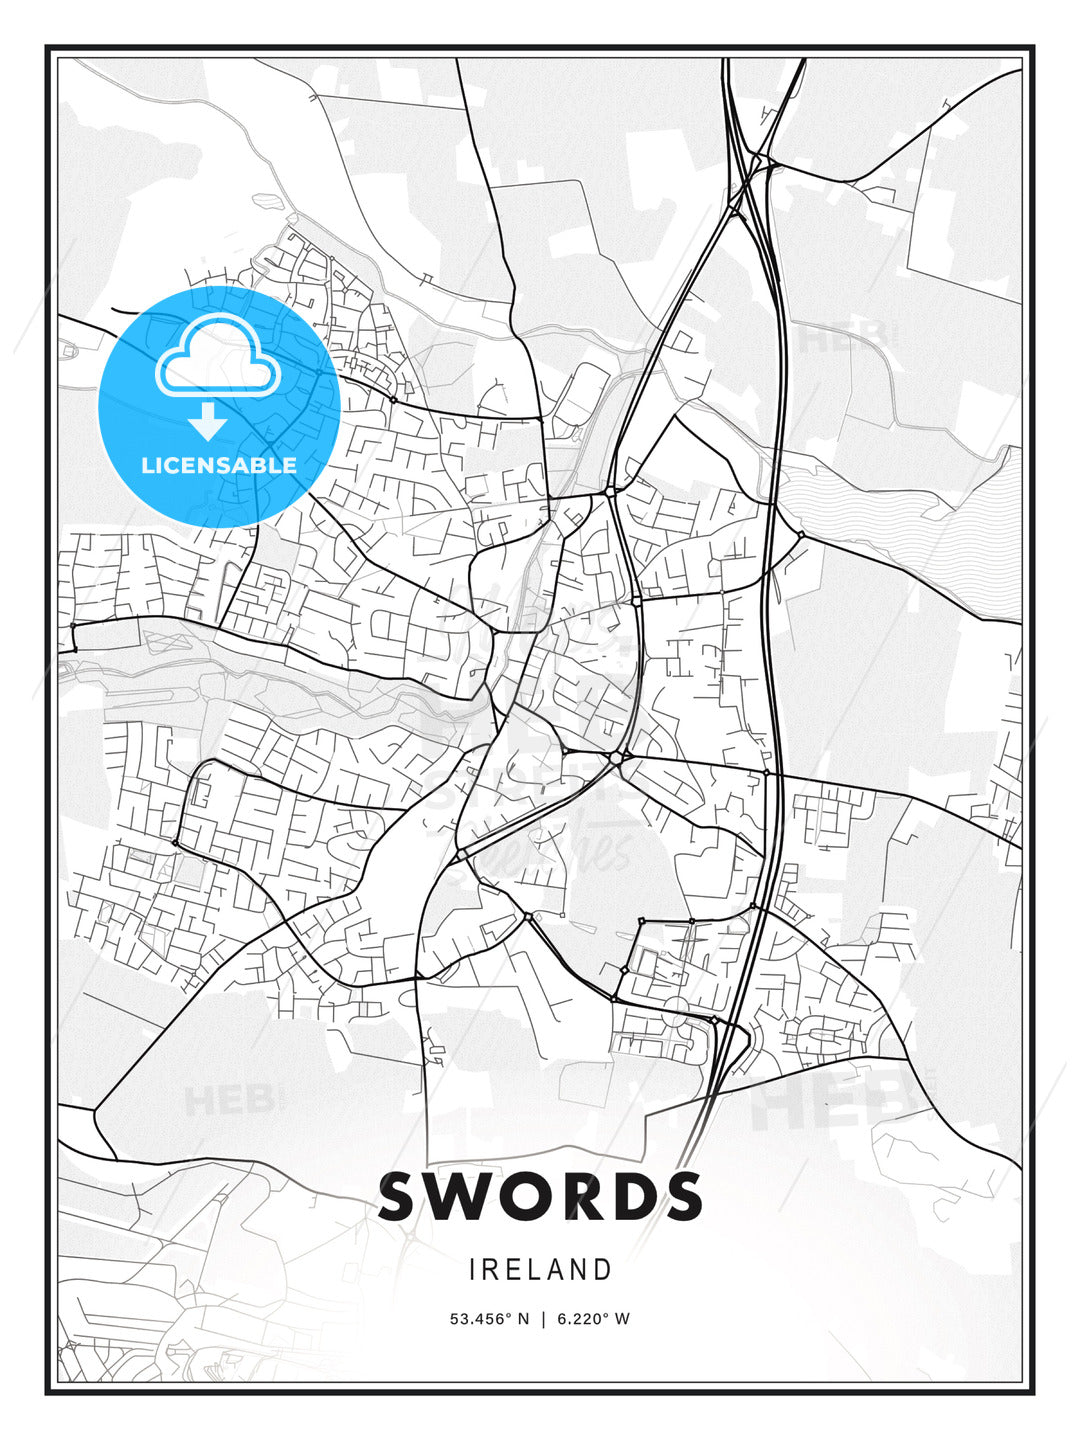 Swords, Ireland, Modern Print Template in Various Formats - HEBSTREITS Sketches